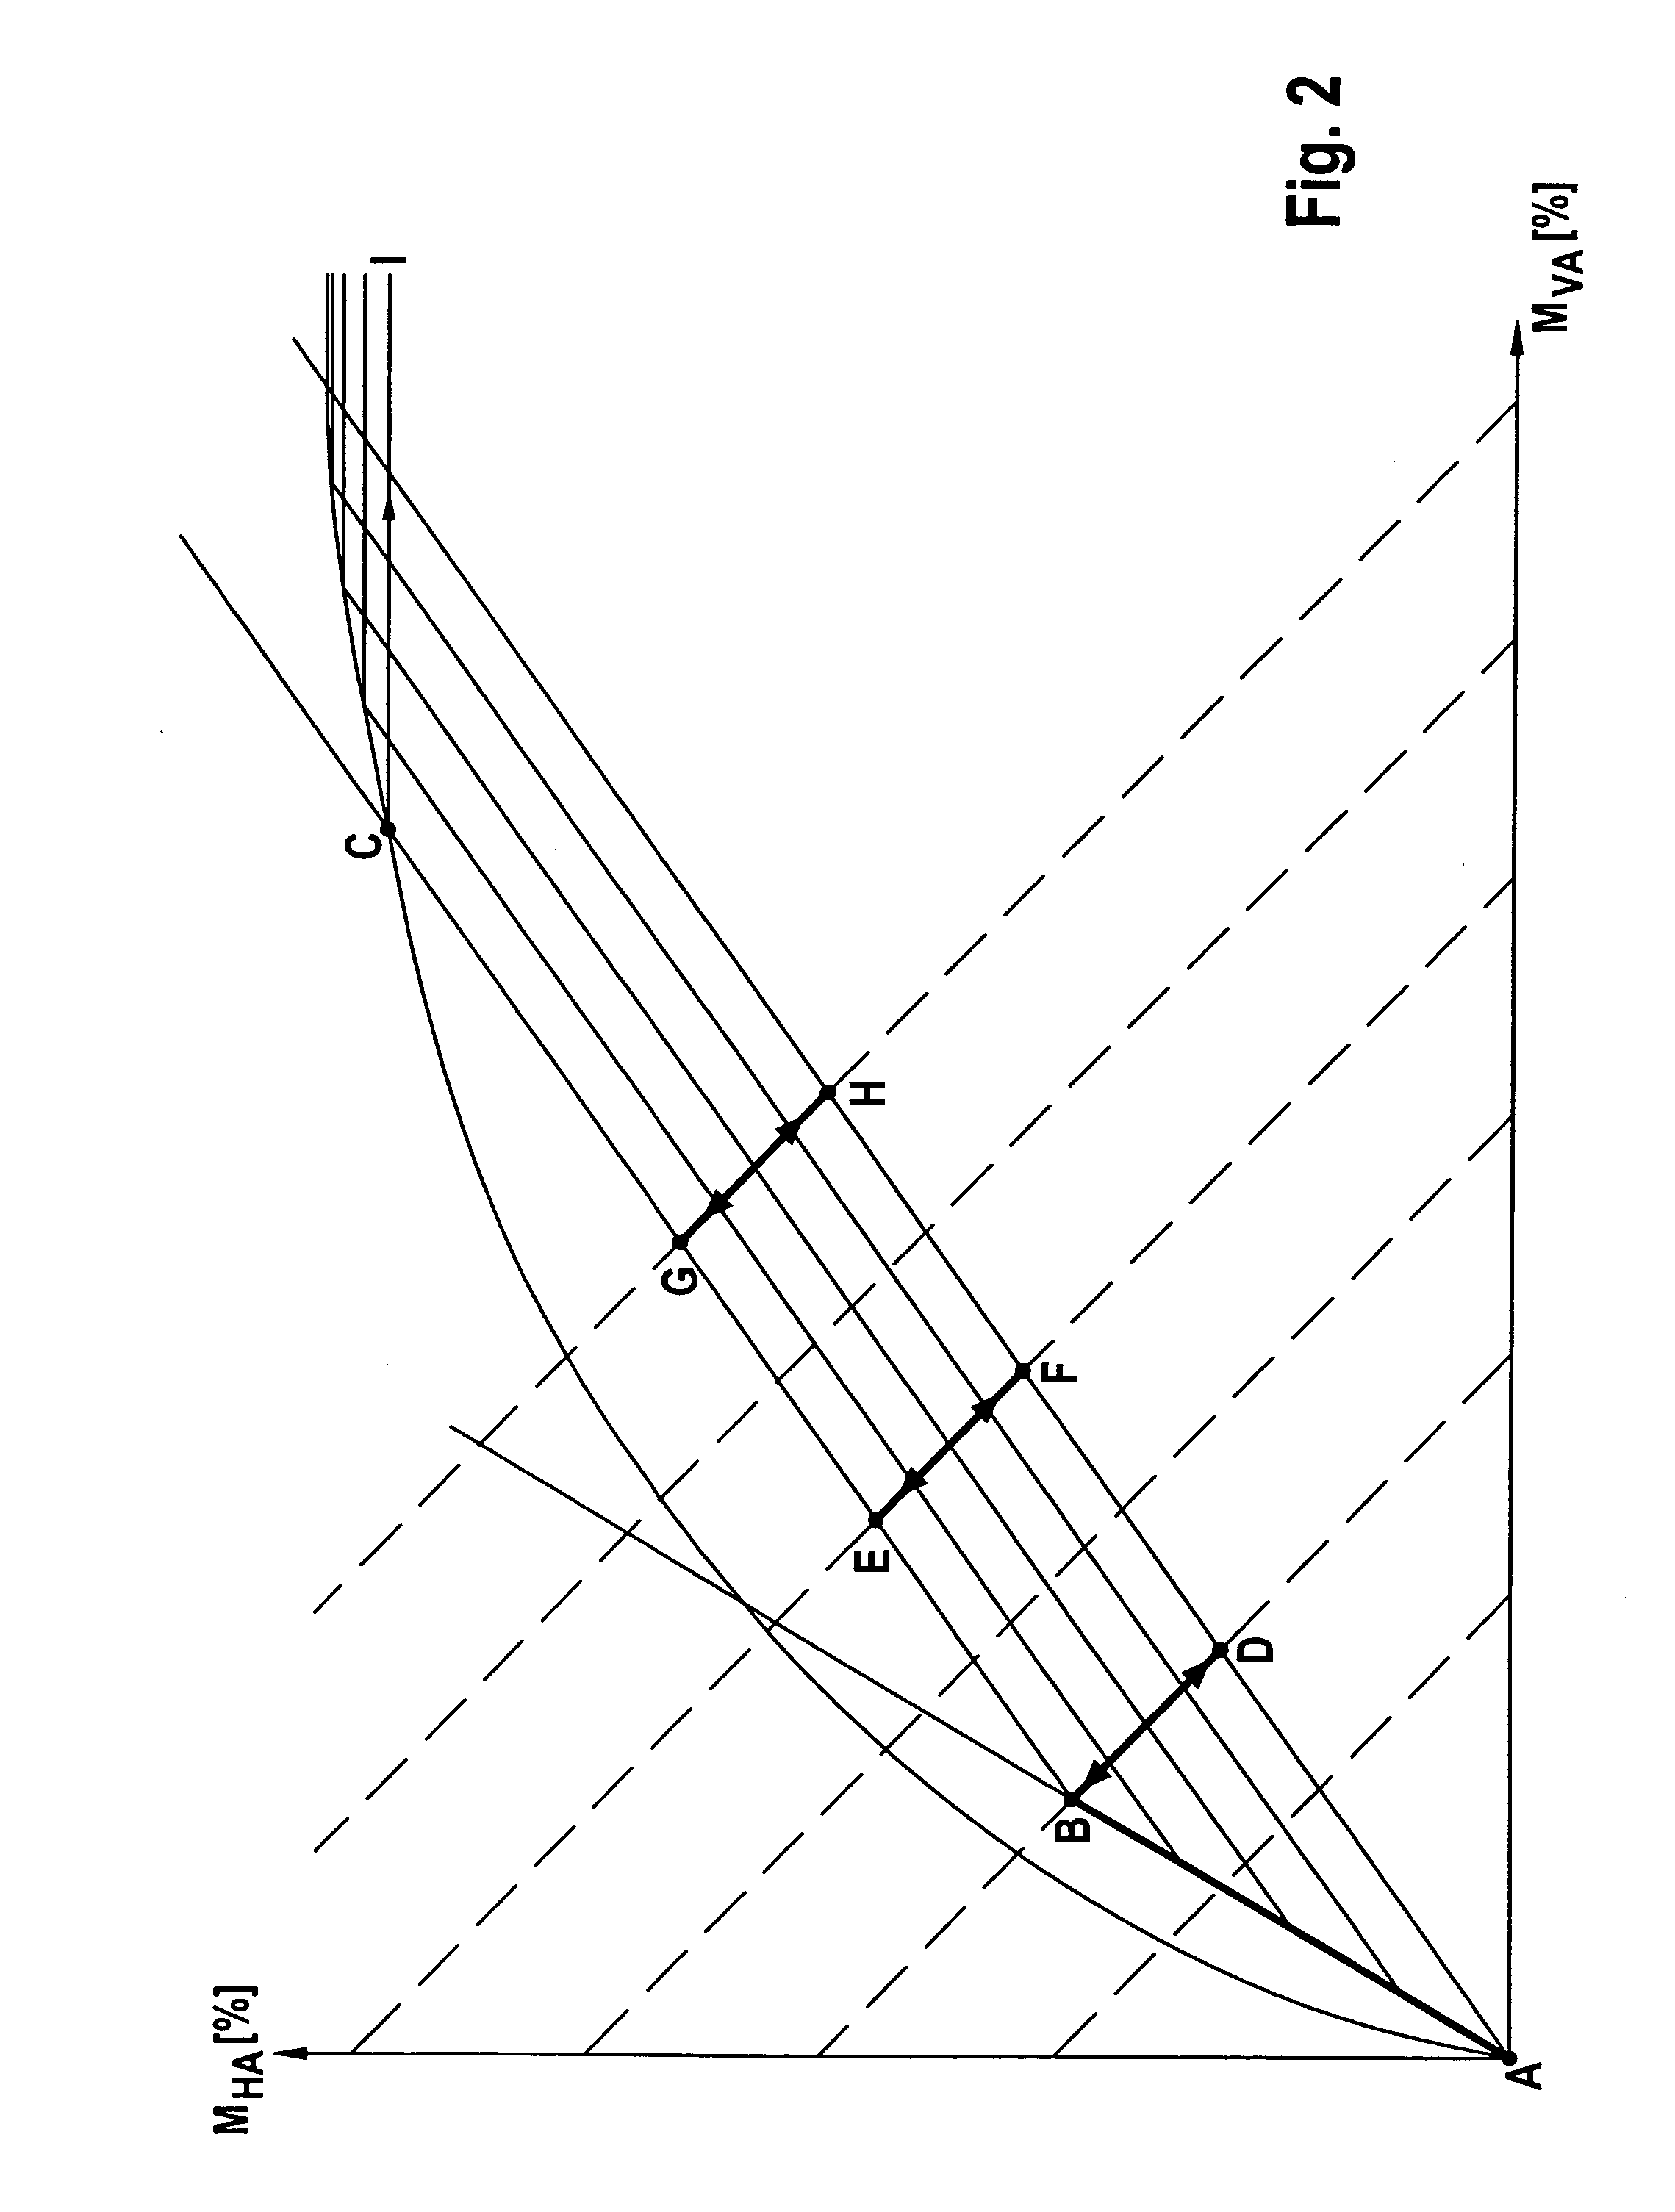 Method for Controlling a Brake System of a Motor Vehicle with All-Wheel Drive